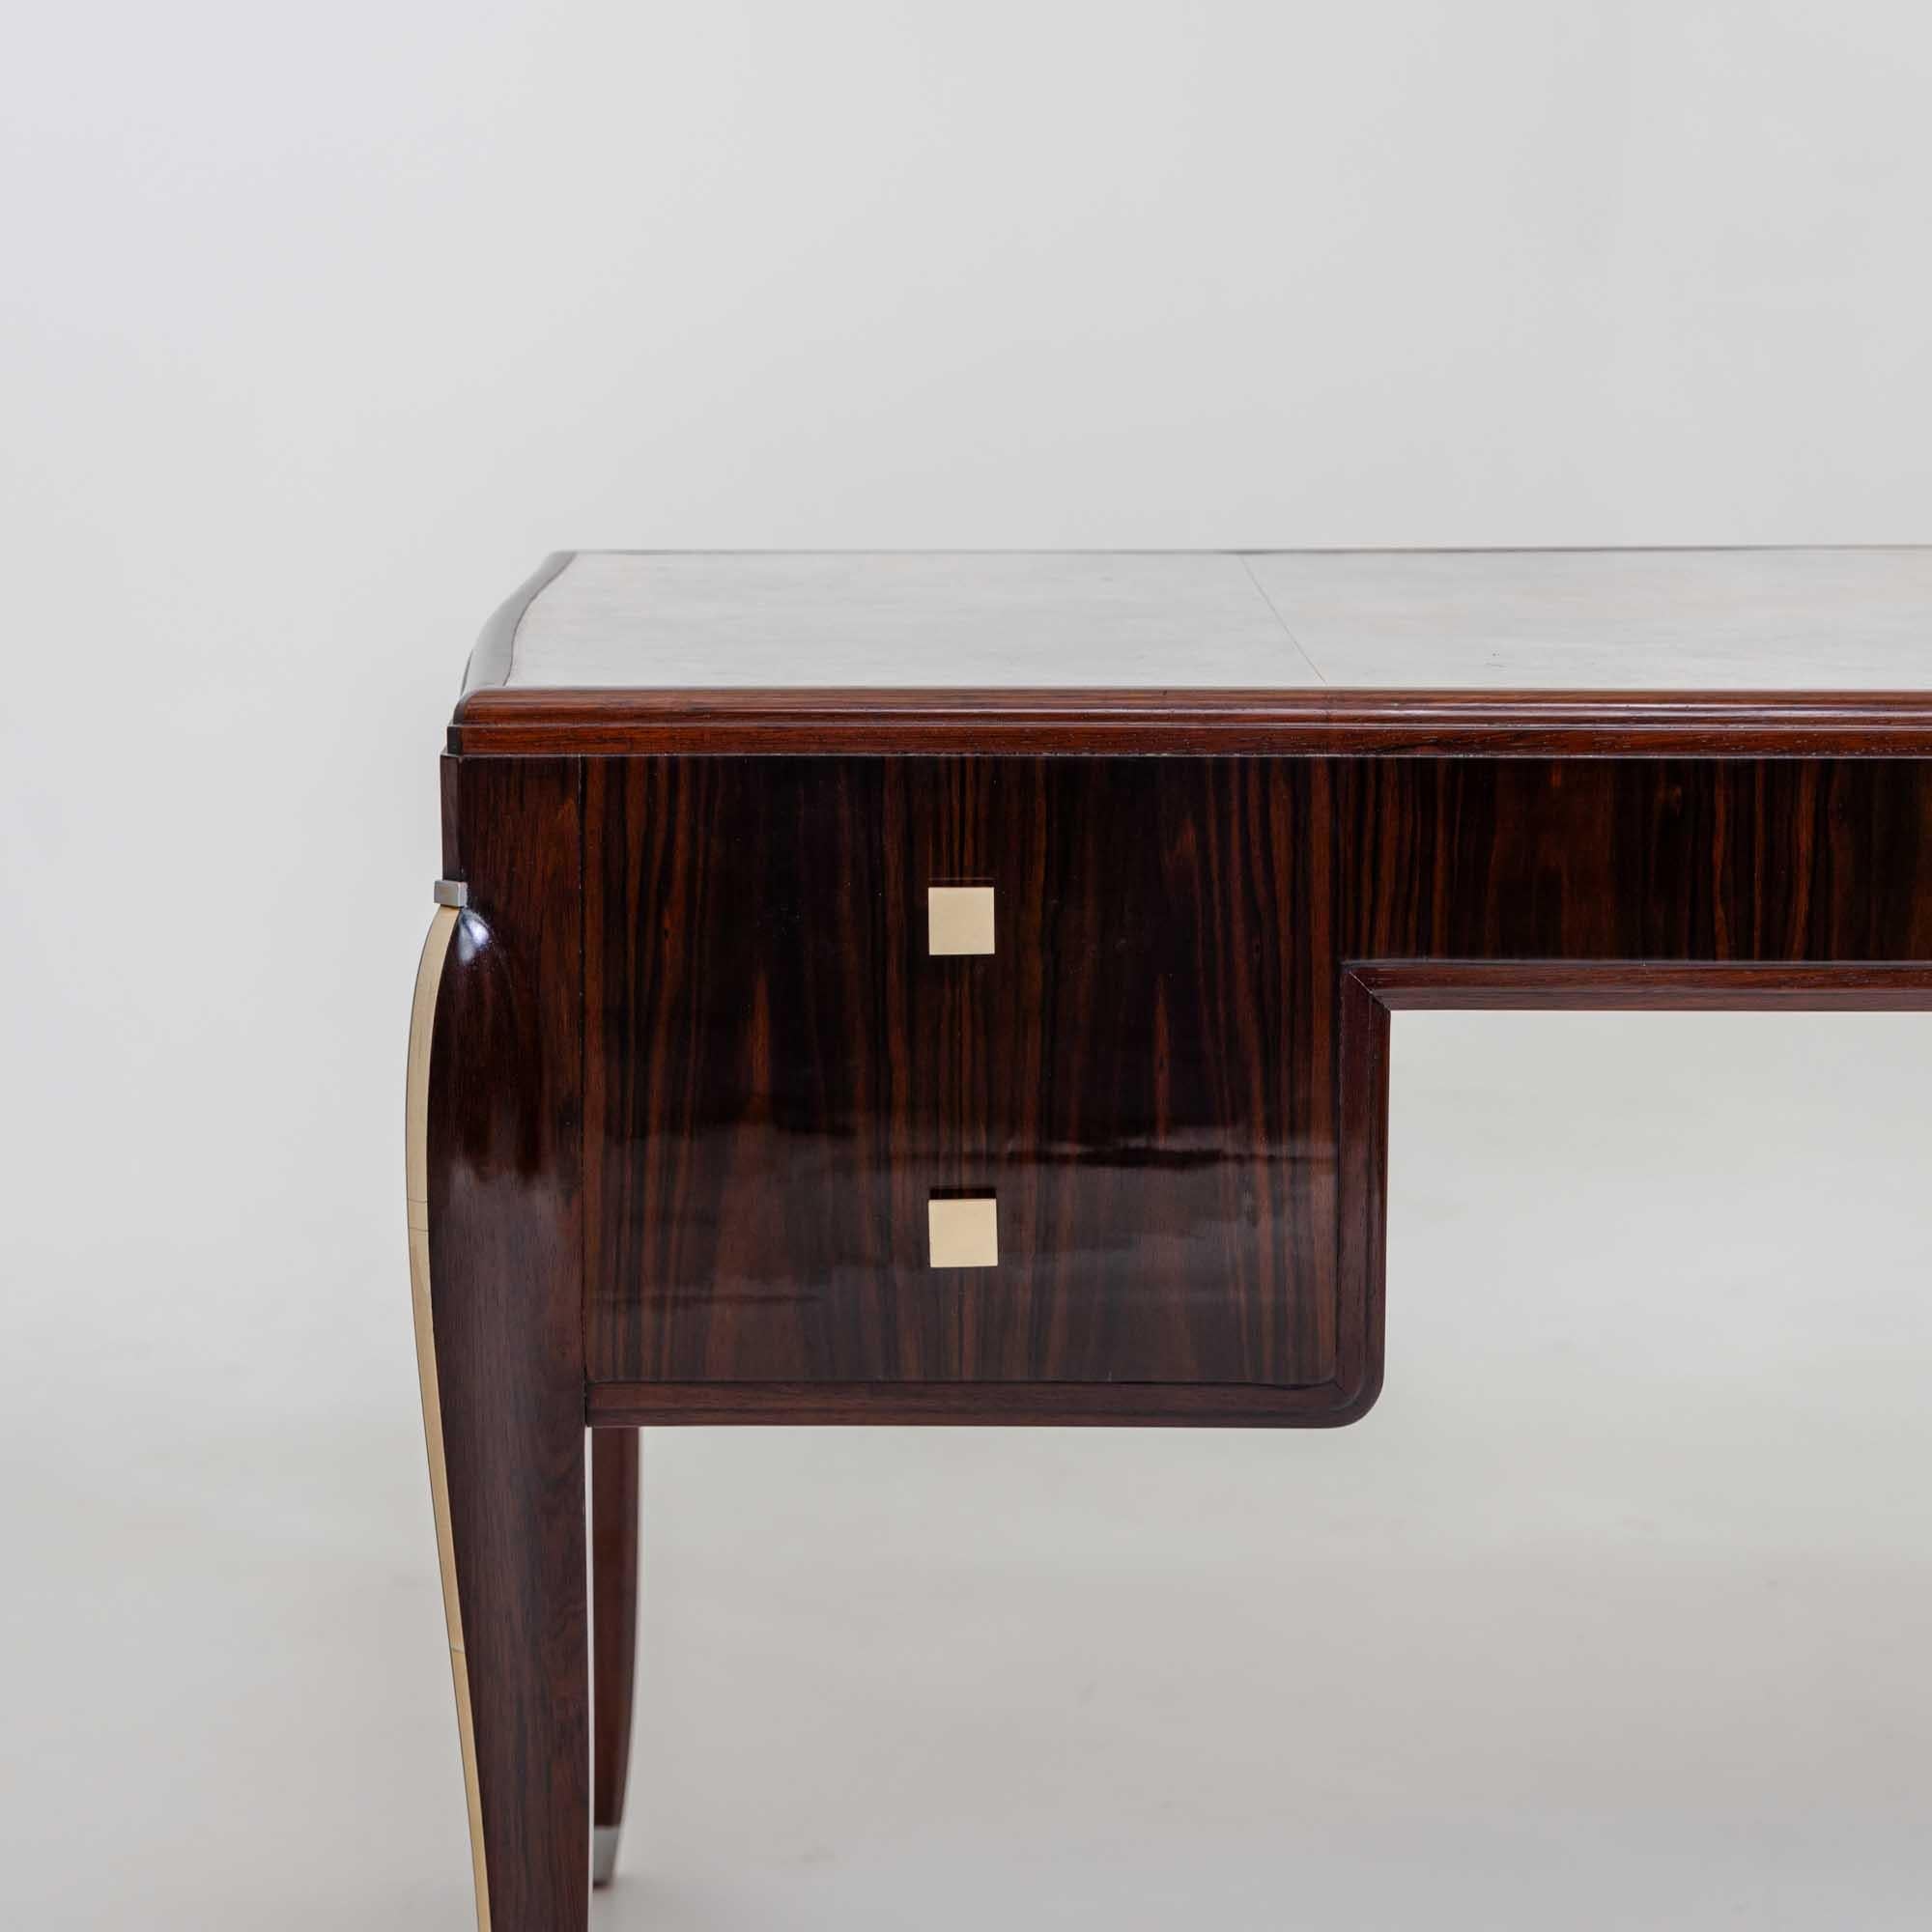 Art Deco Desk in the style of Jacques-Emile Ruhlmann (1879-1933), France, 1920s For Sale 10